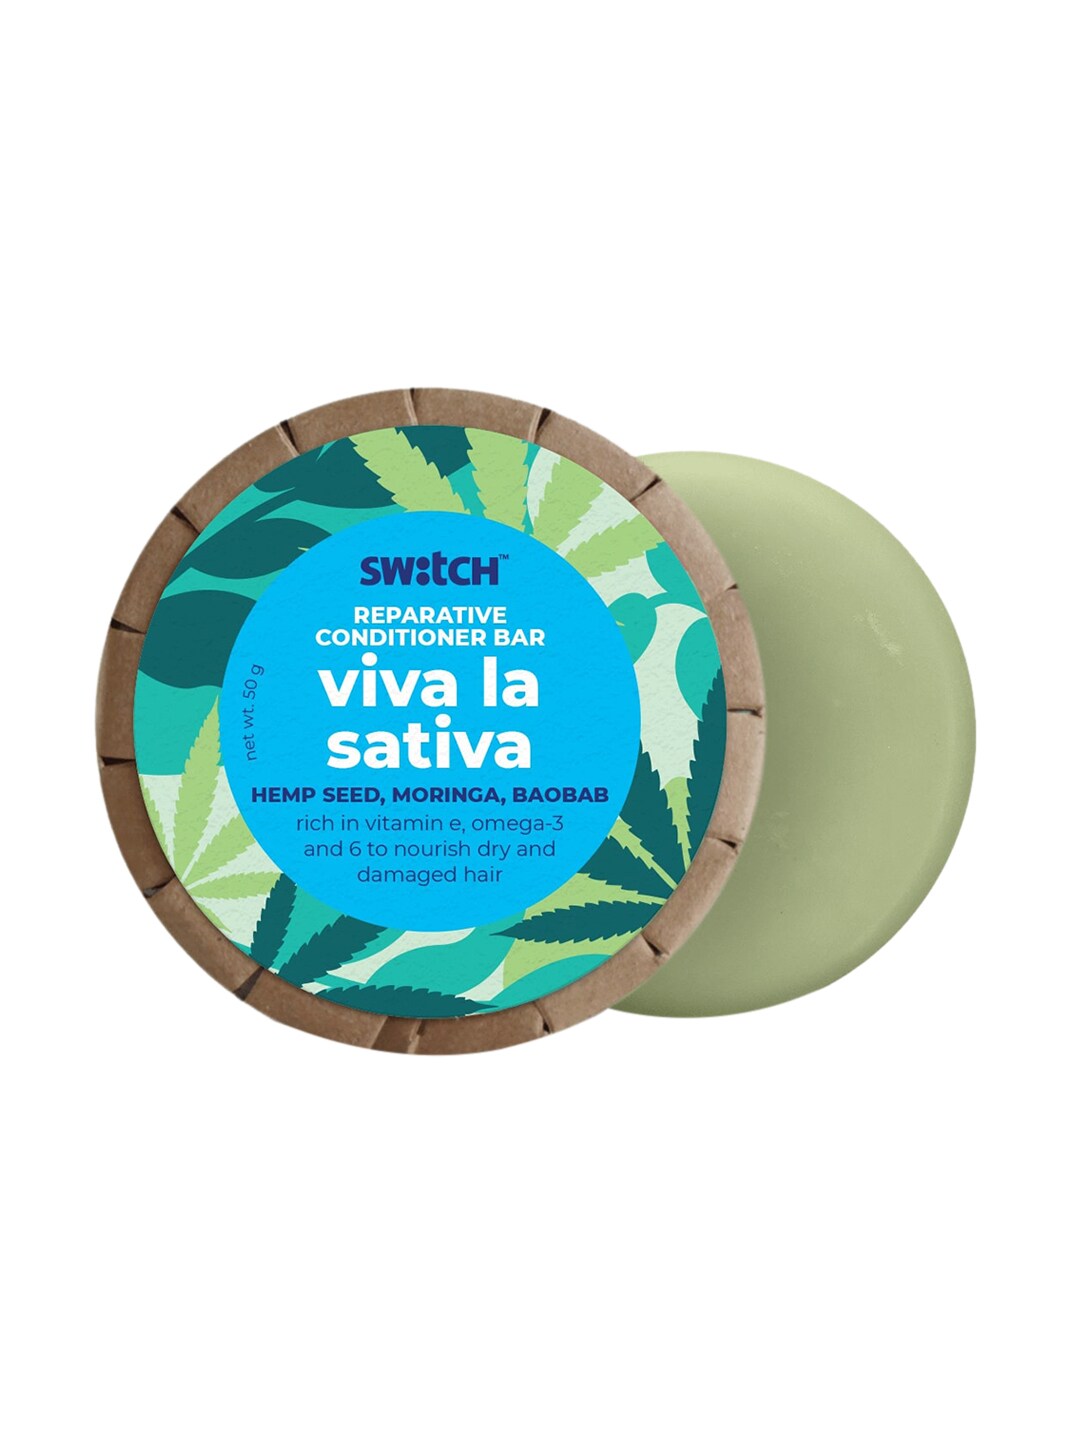 The Switch Fix Viva La Sativa Conditioner Bar for Dehydrated Hair - 50g Price in India